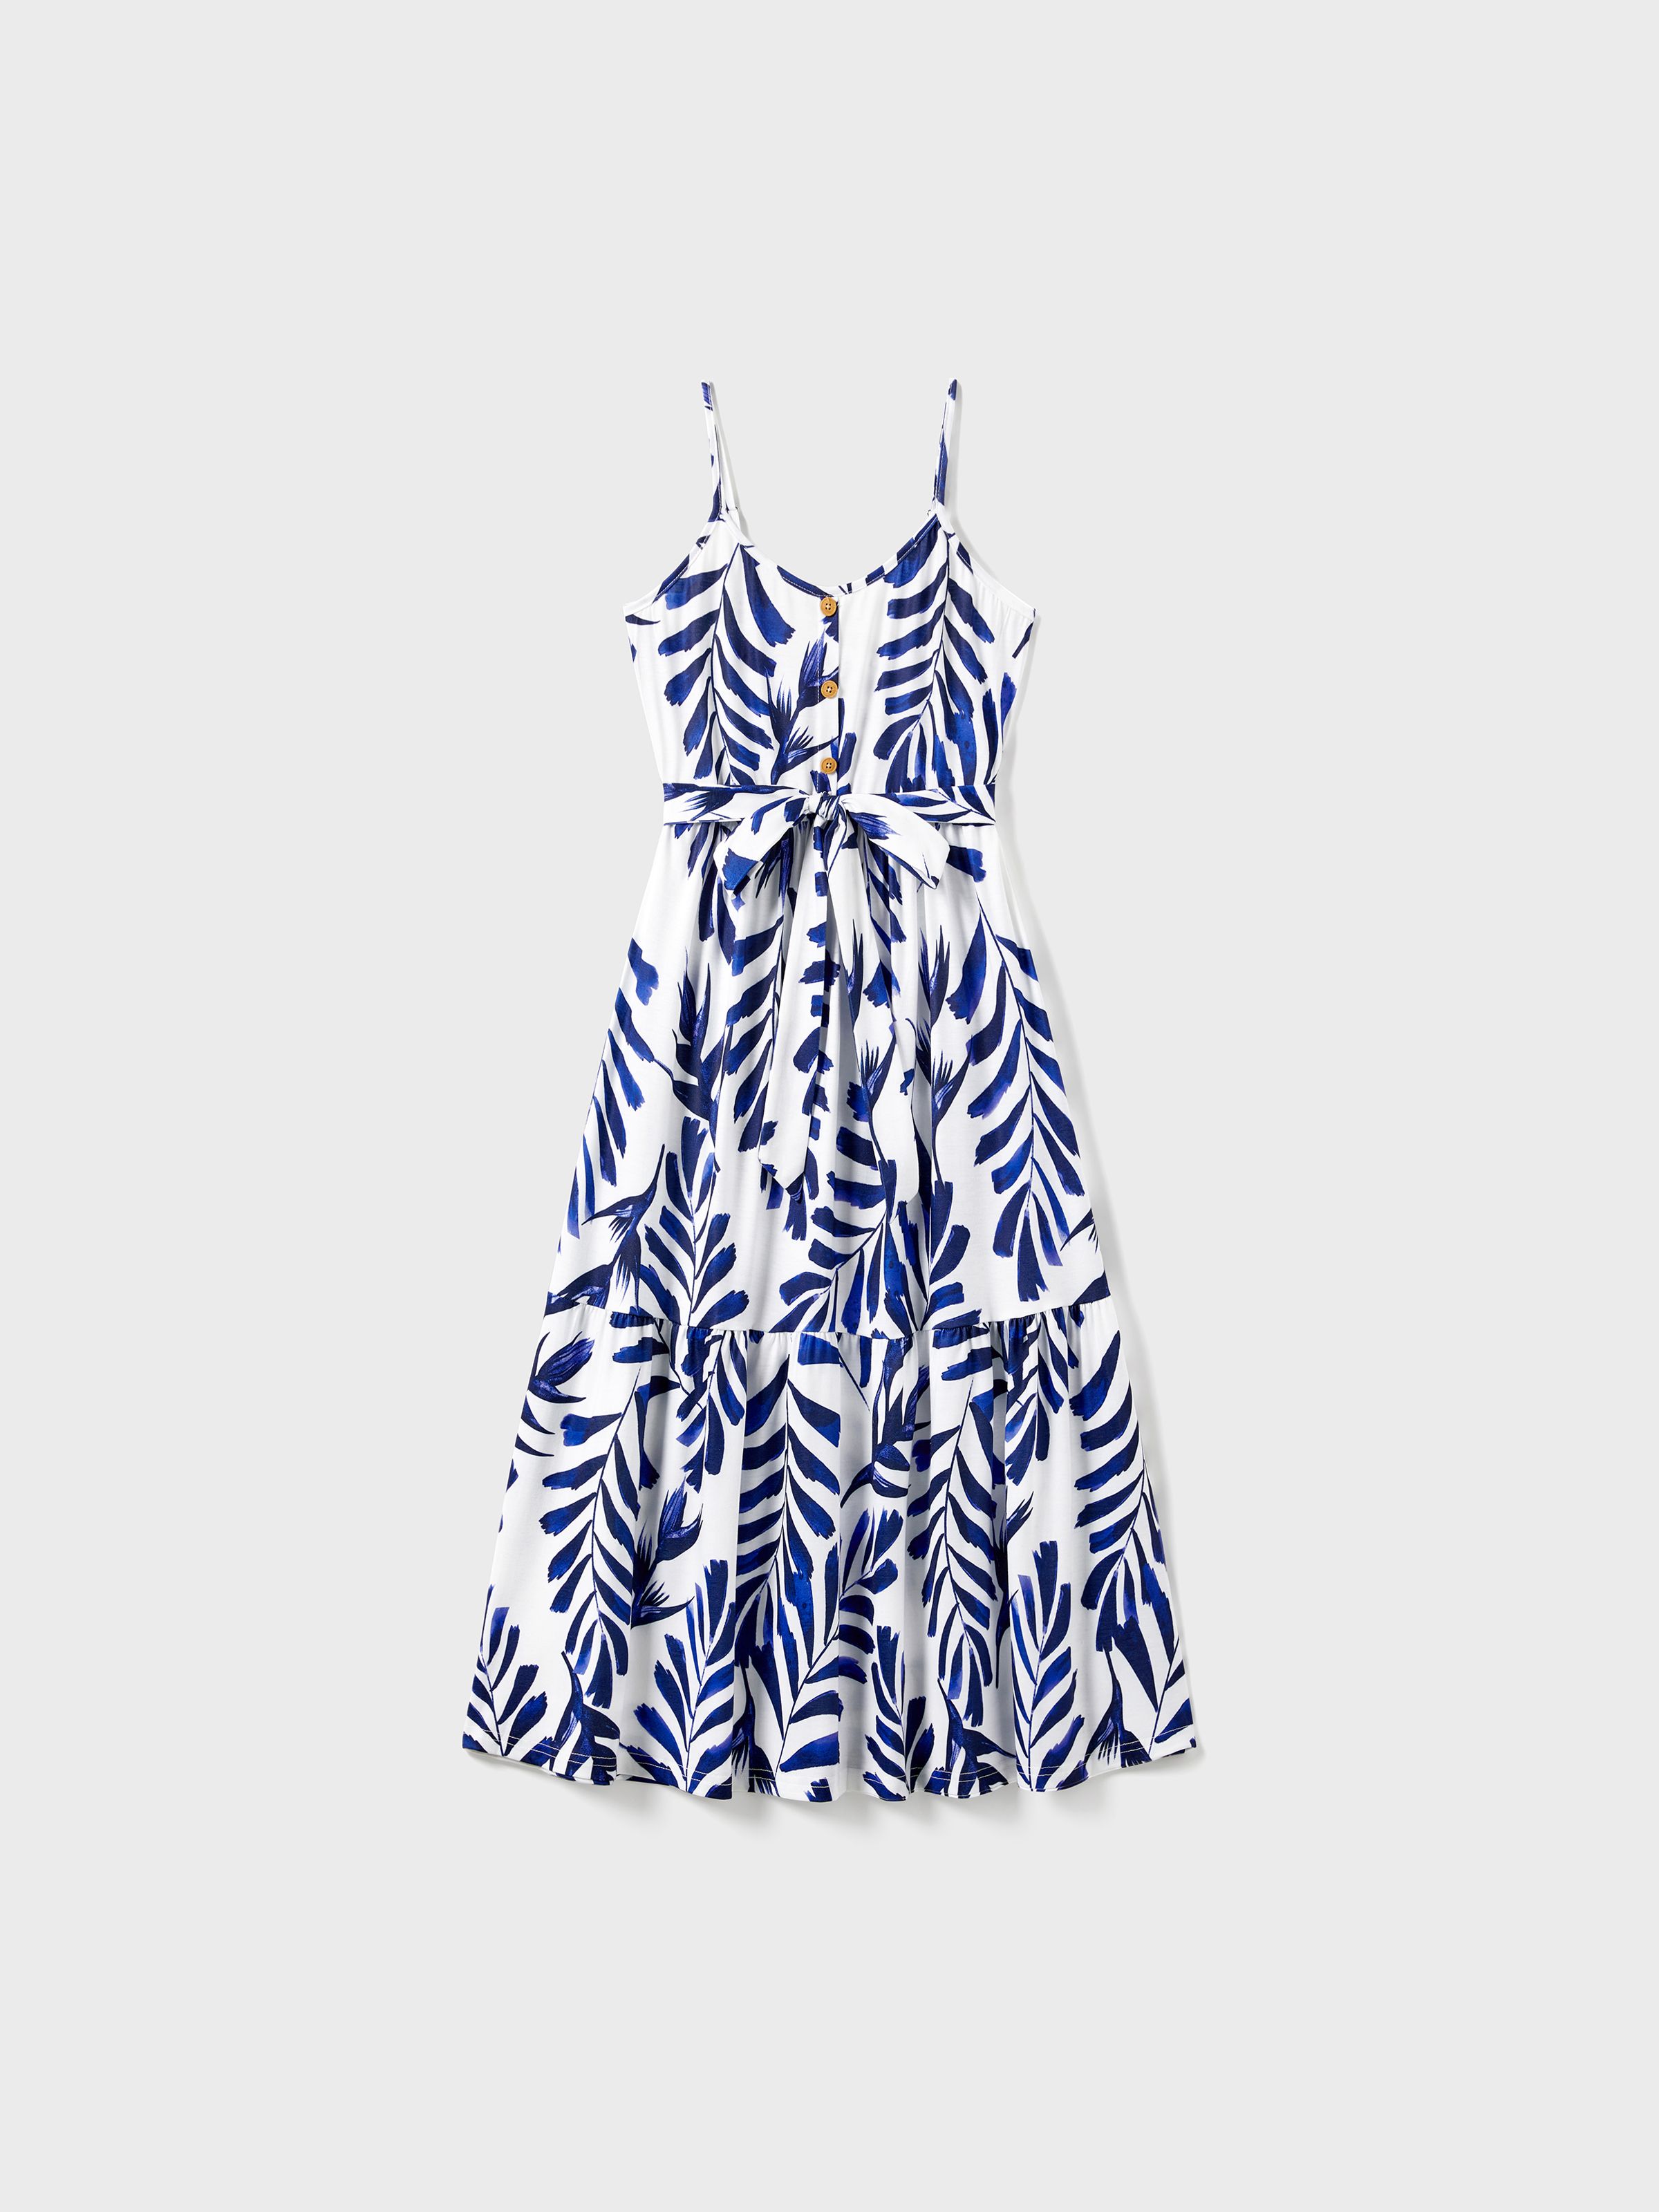 

Family Matching Modern Blue and White Botanical Leaf Design Button Strap Dress and Color Block Tee Sets